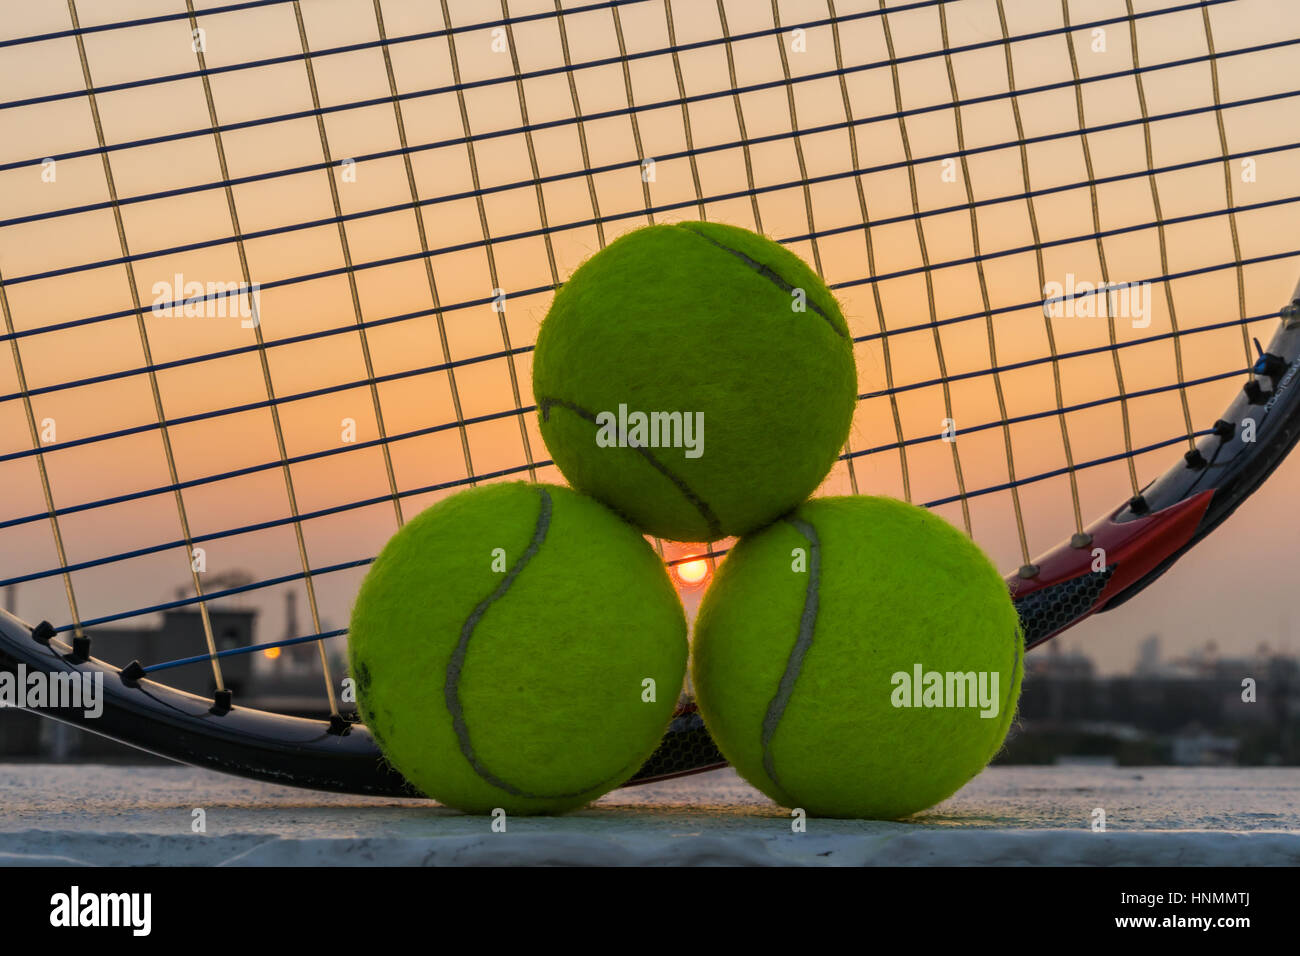 Tennis racket with sunset and tennis balls. Stock Photo